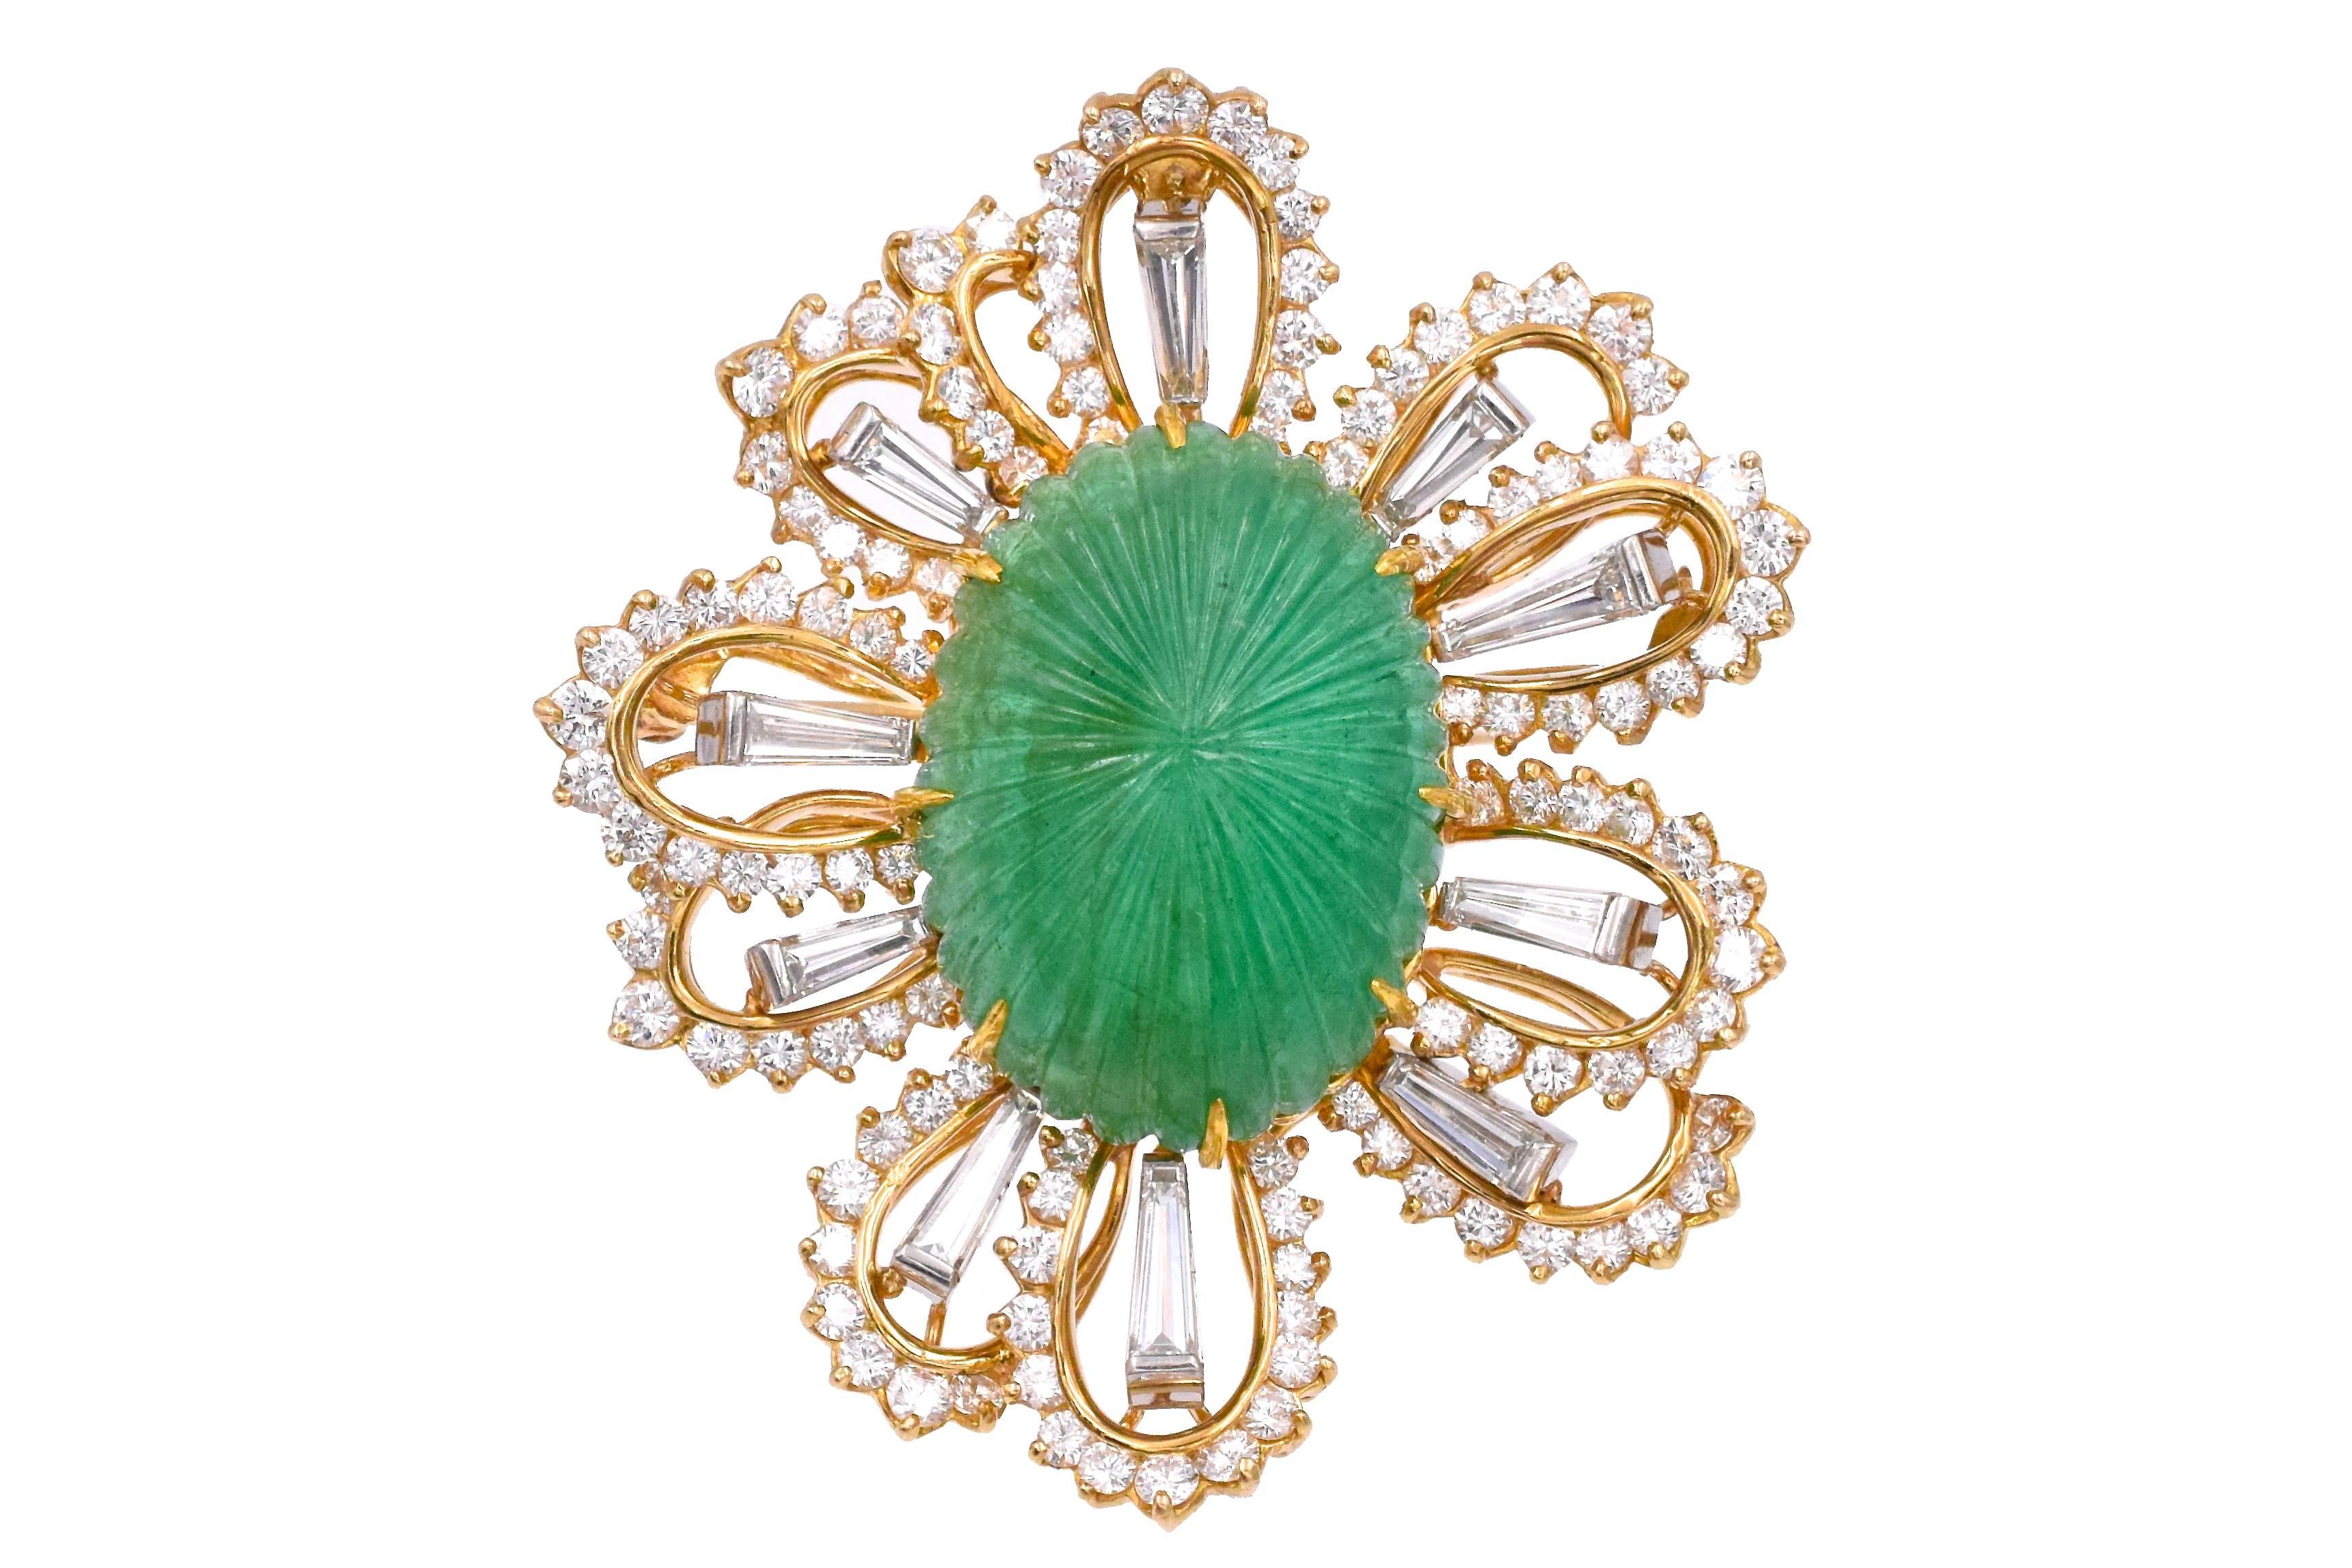  Oscar Heyman, Circa 1971,  Emerald and Diamond Brooch
consisting of a central oval carved emerald weighing approximately 36.22 carats within stylized foliate setting containing brilliant  diamonds weighing approximately 4.70 carats total and 